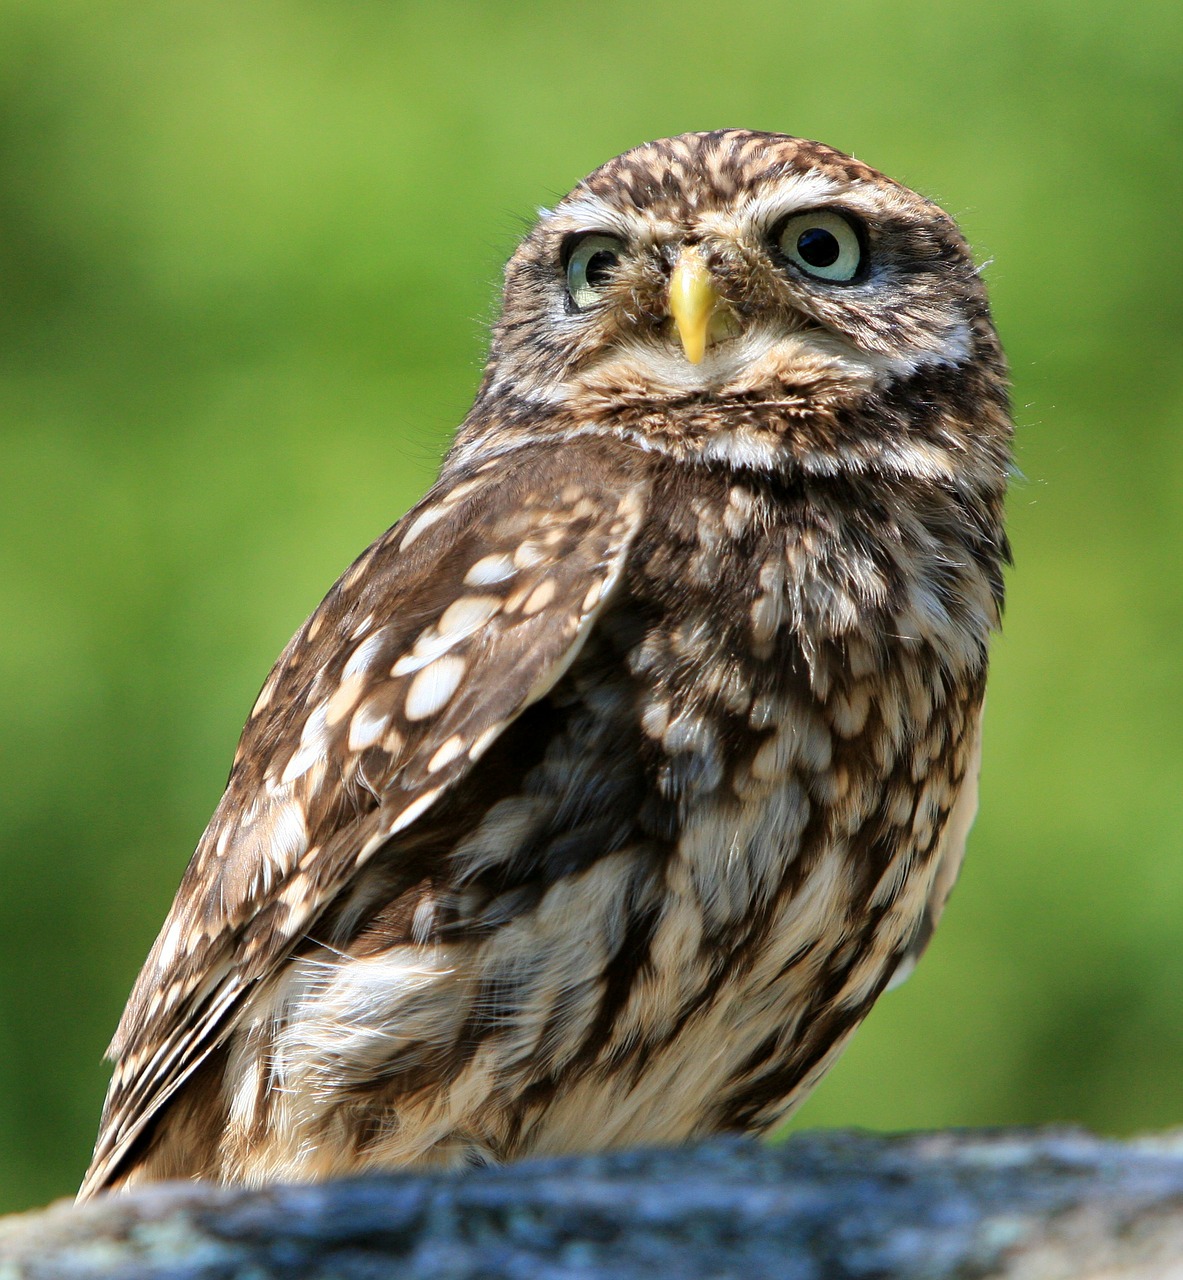 Living With Owl As Your Birth Totem - Native American Totems